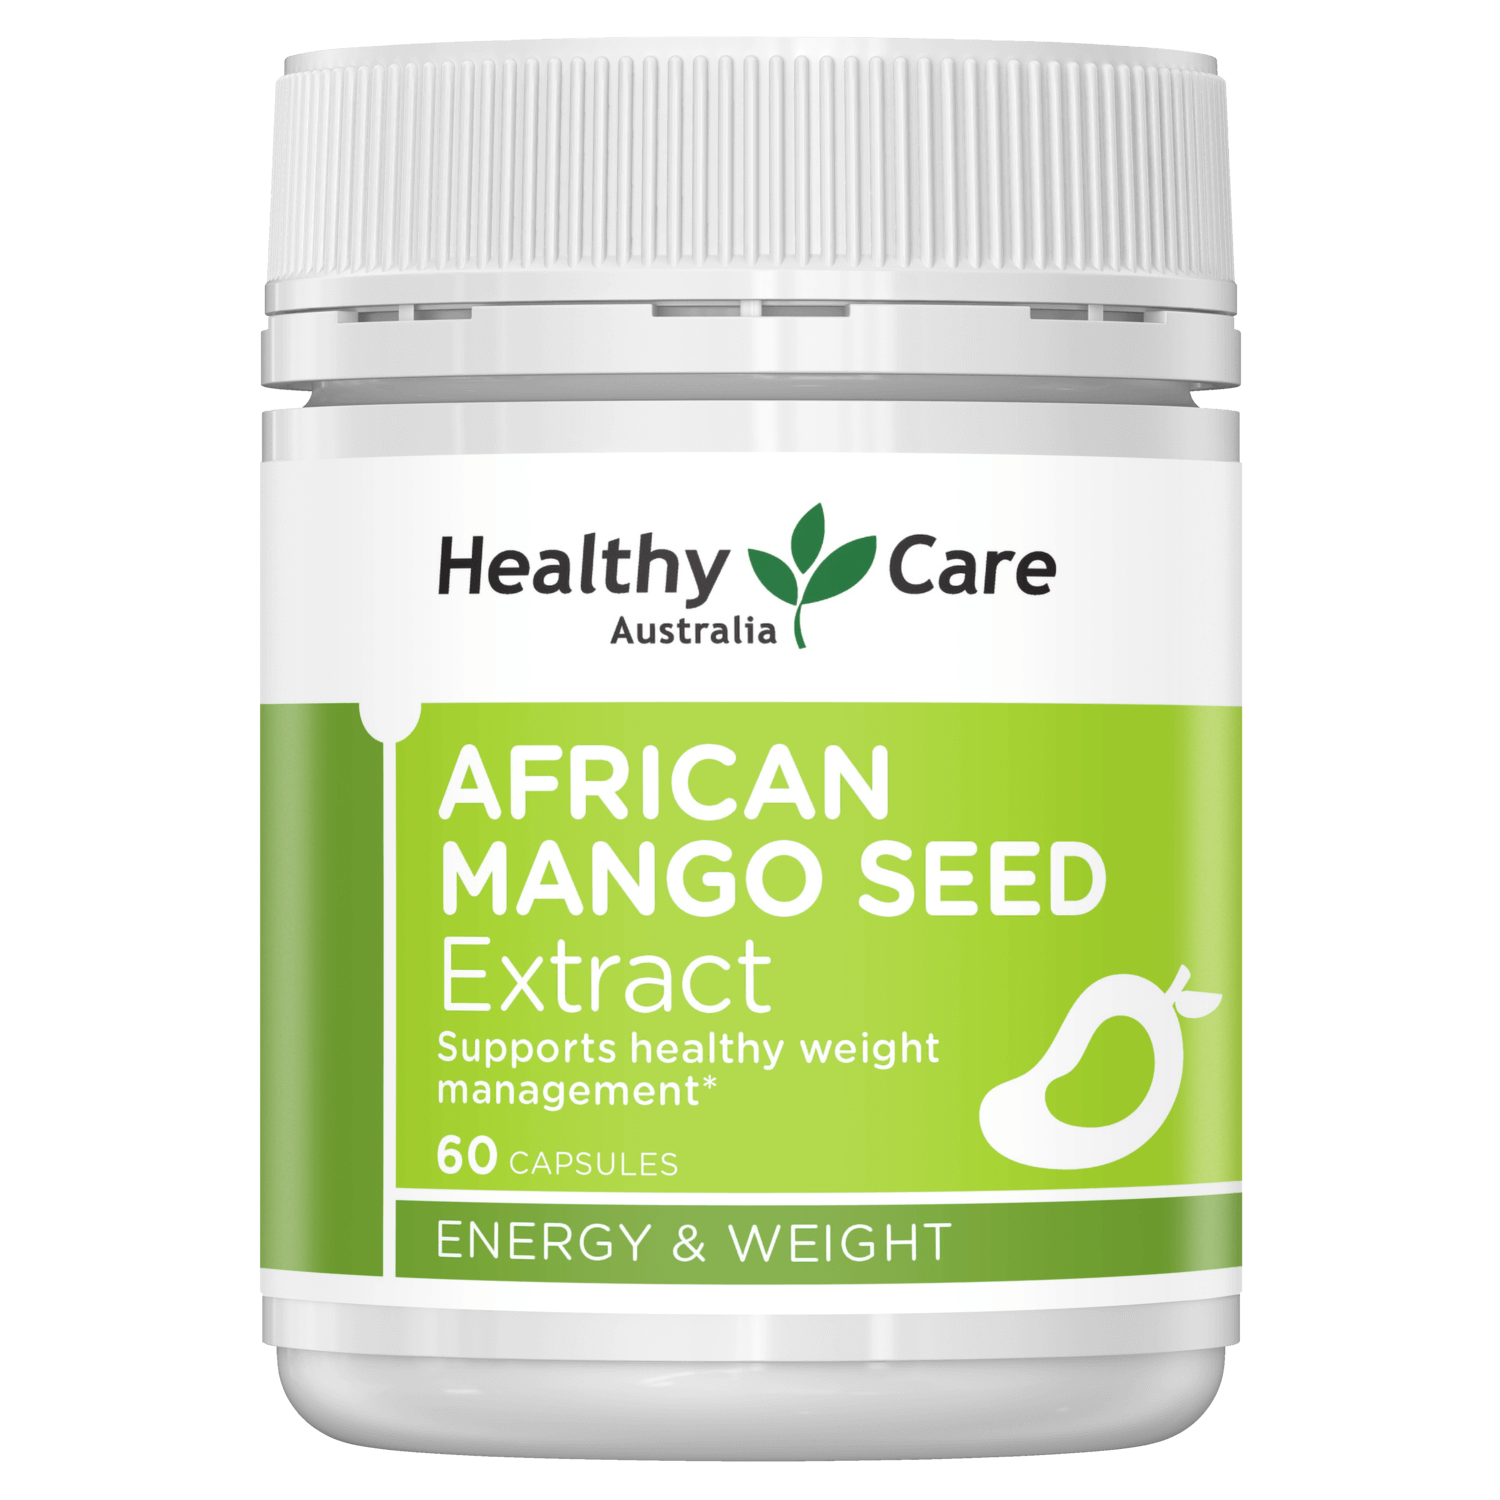 African Mango seed reviews